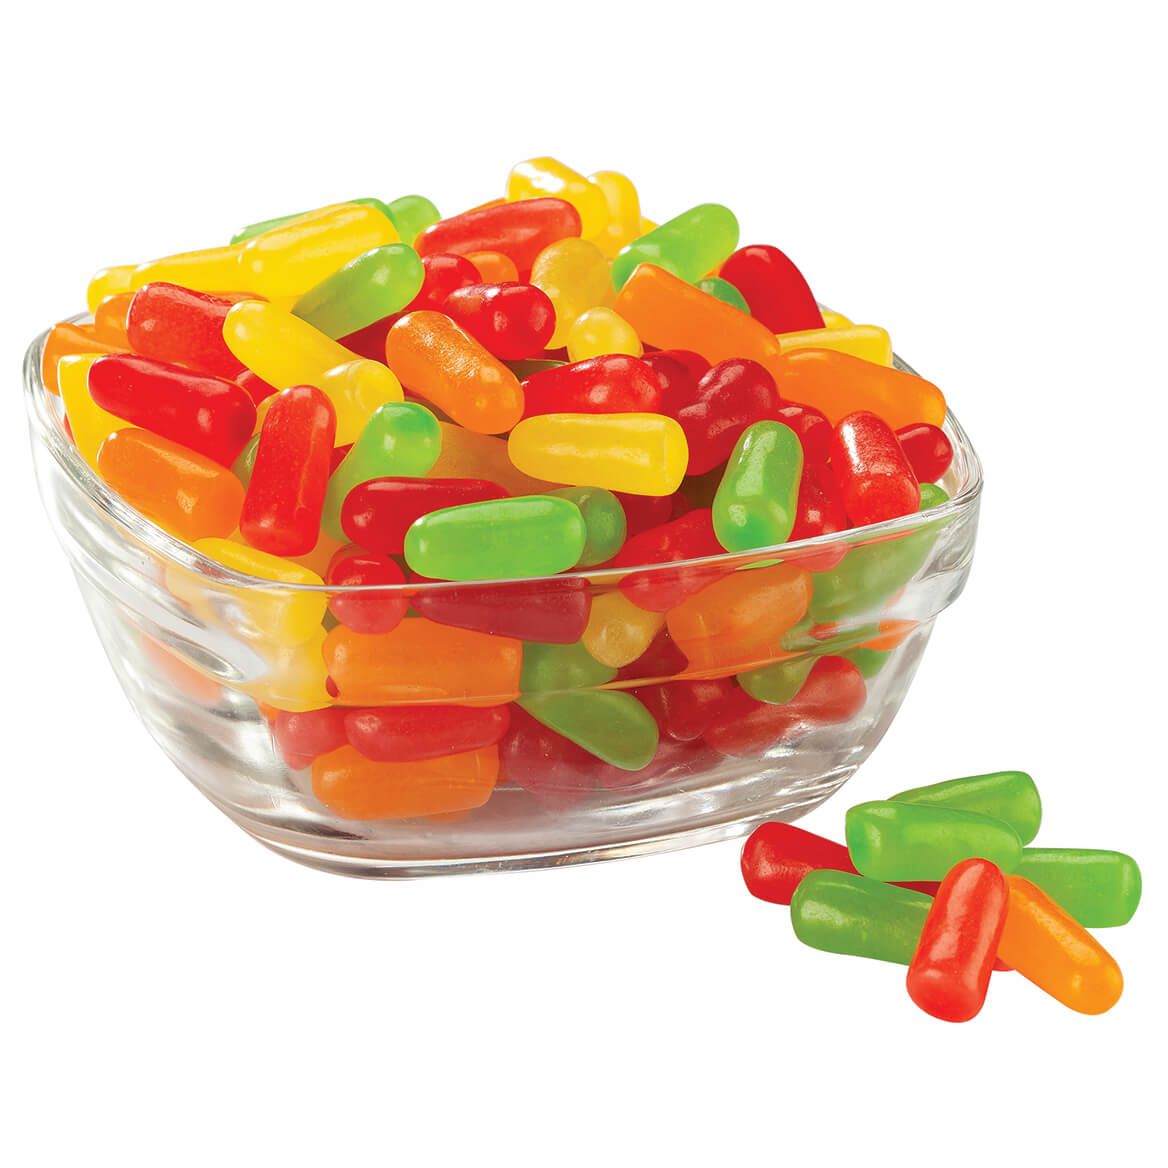 Mrs. Kimball's Mike and Ike Candy, 16 oz. + '-' + 376685